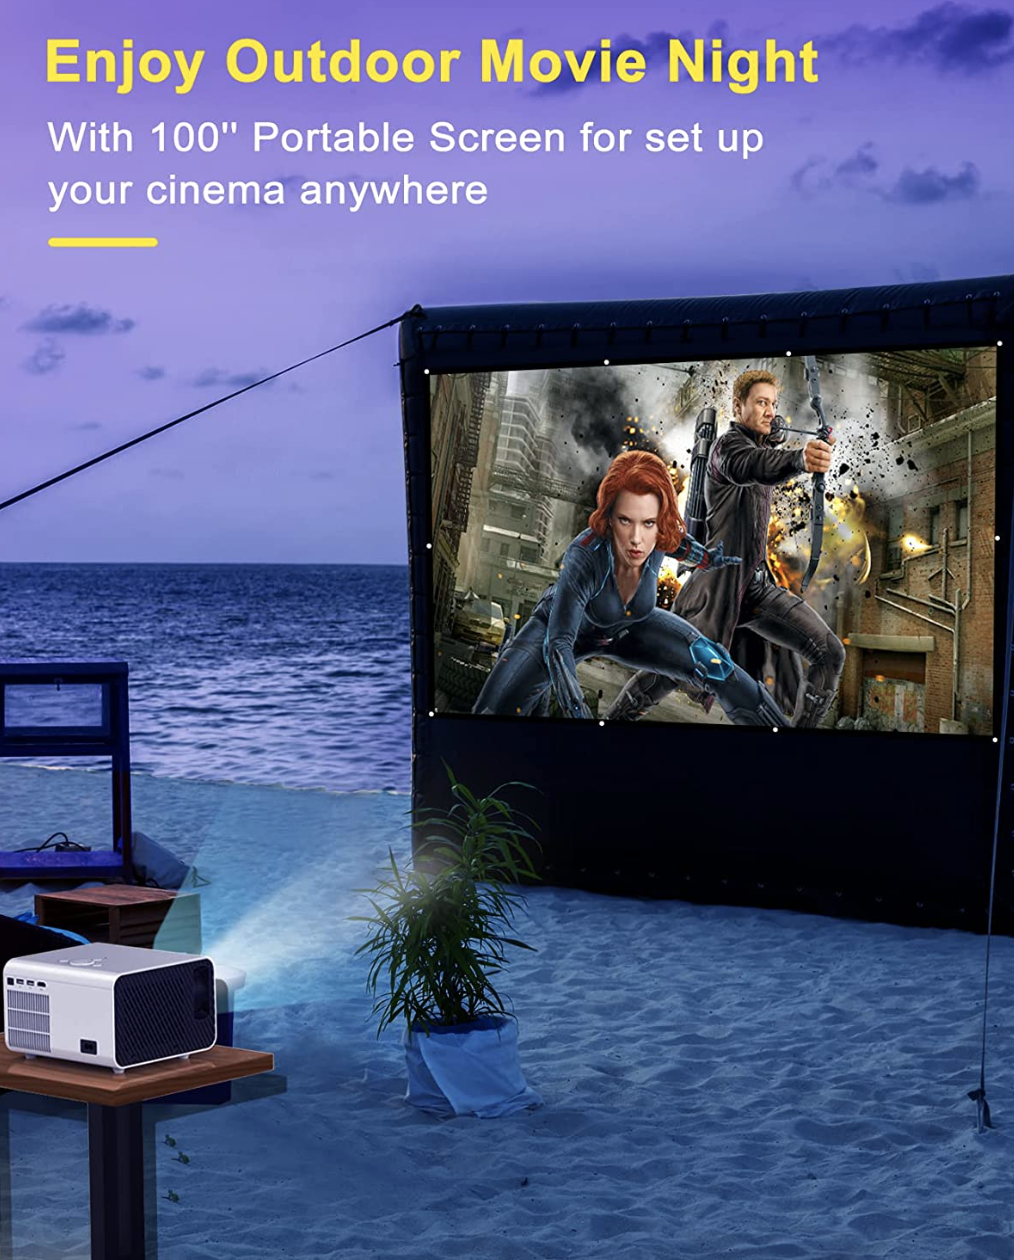 The projector and screen on a beach